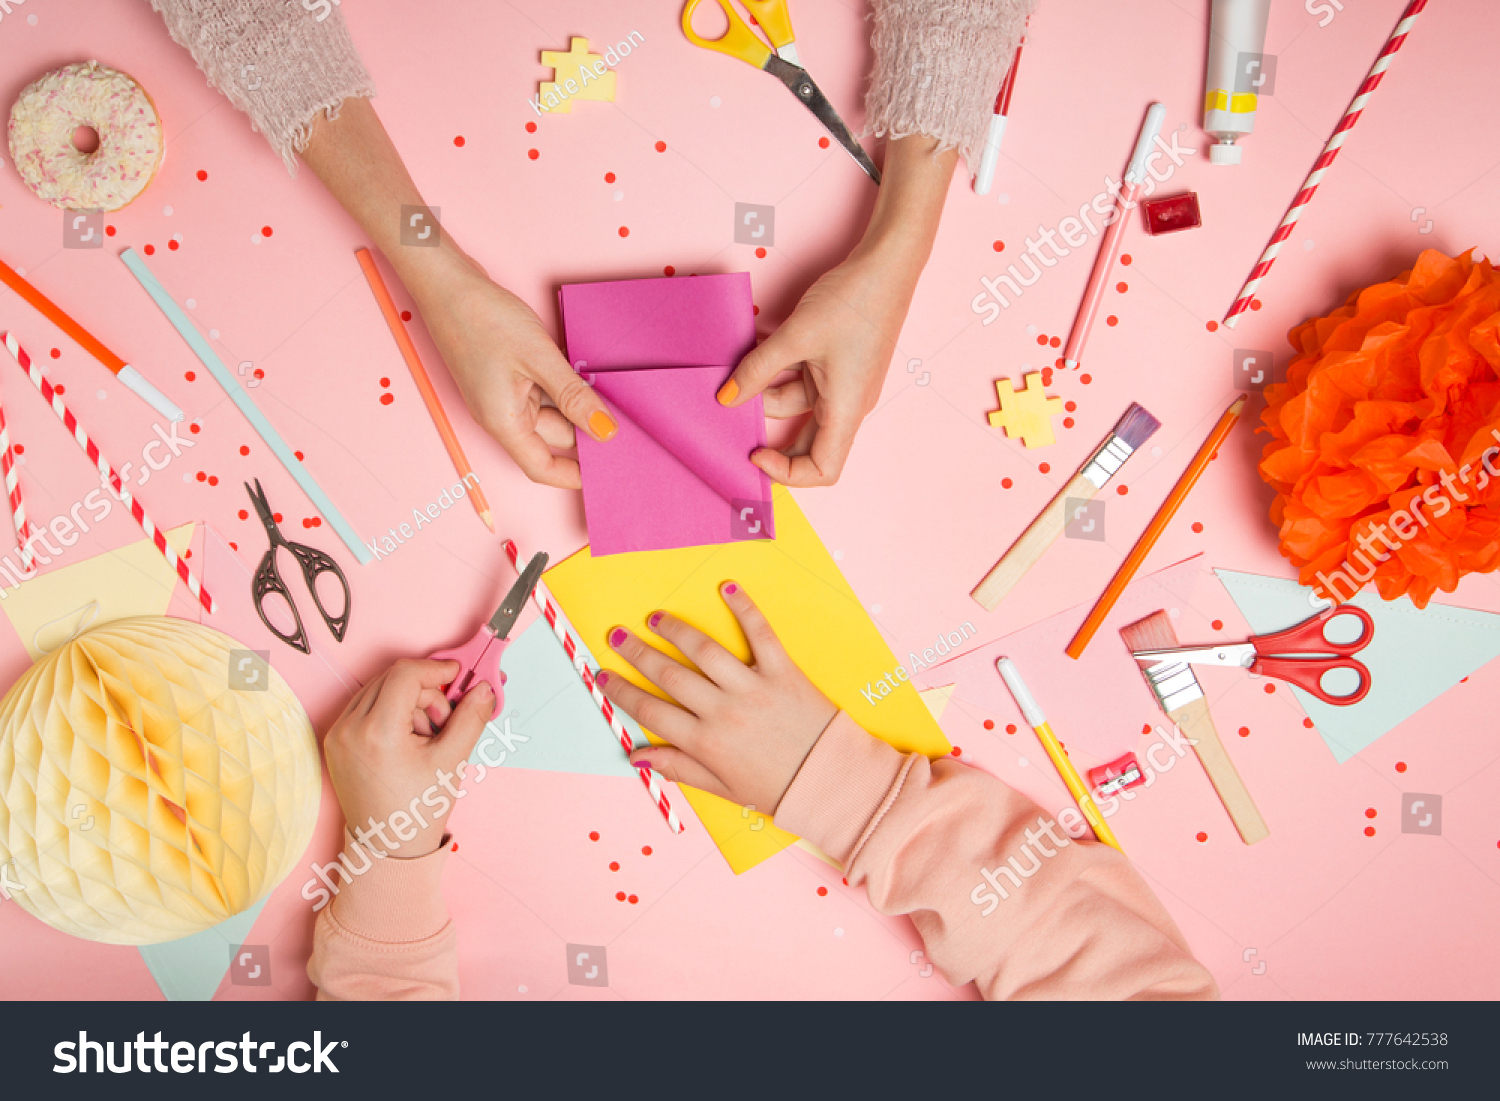 Colorful pink background with various party confetti, paper decoration, flags, stationary, DIY accessories with woman's and kid's hands making greeting card. Fat lay top view. Party arrangement #777642538